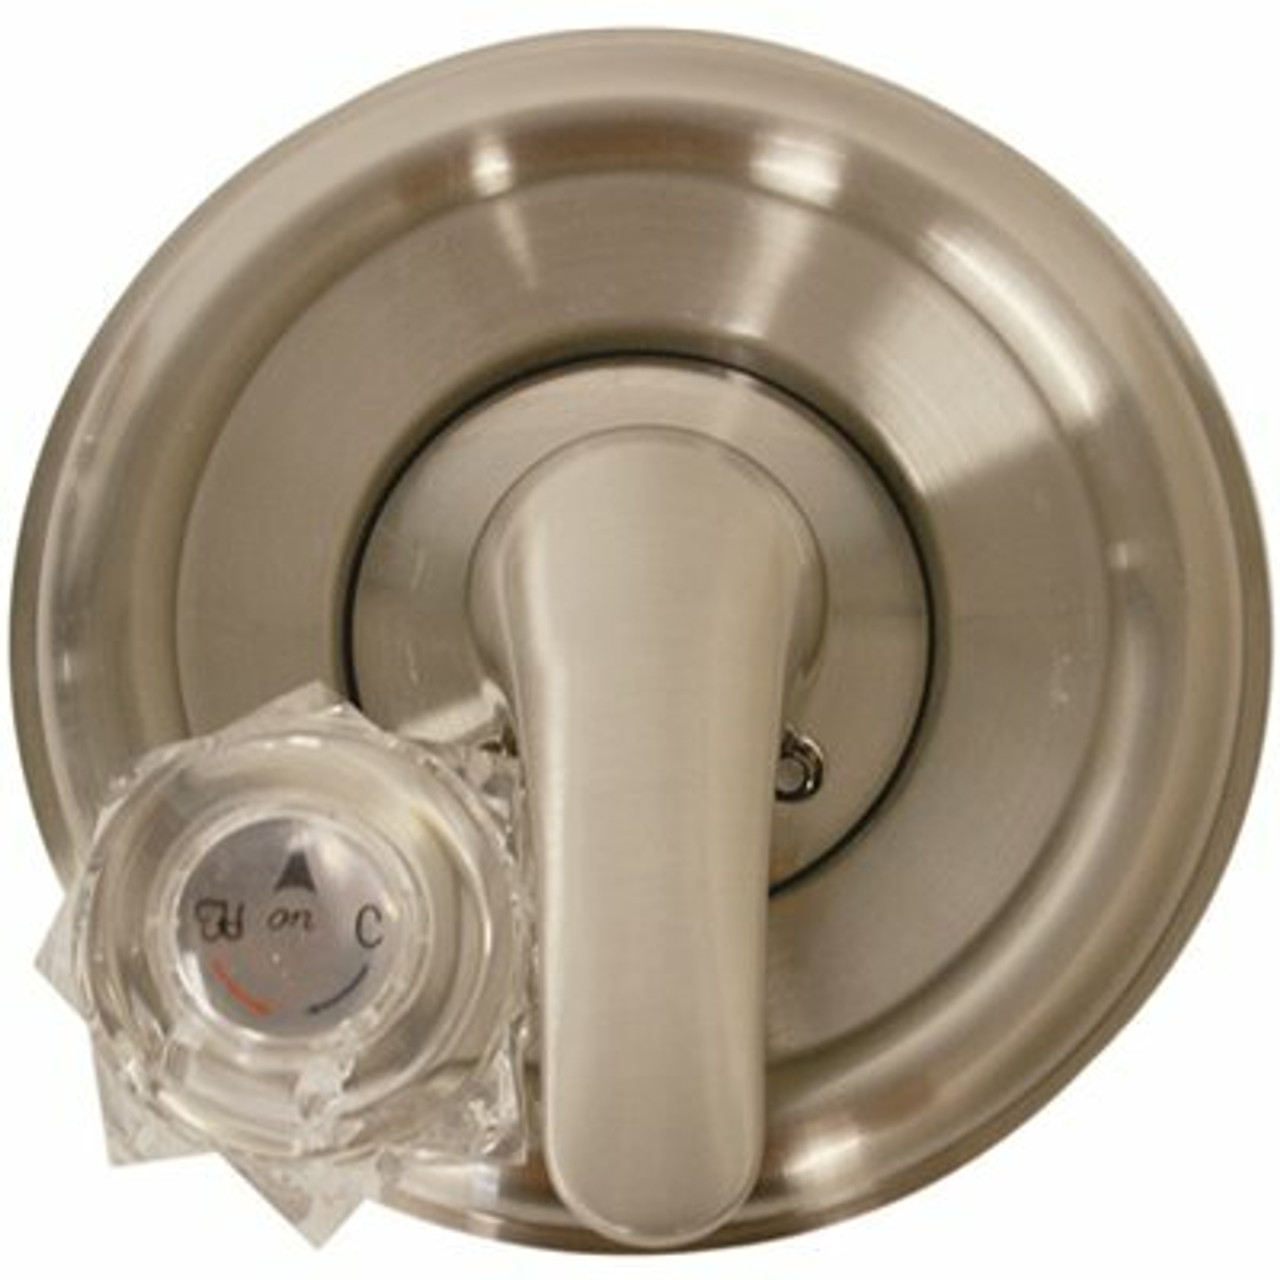 Danco 1-Handle Valve Trim Kit In Brushed Nickel For Delta Tub/Shower Faucets (Valve Not Included)